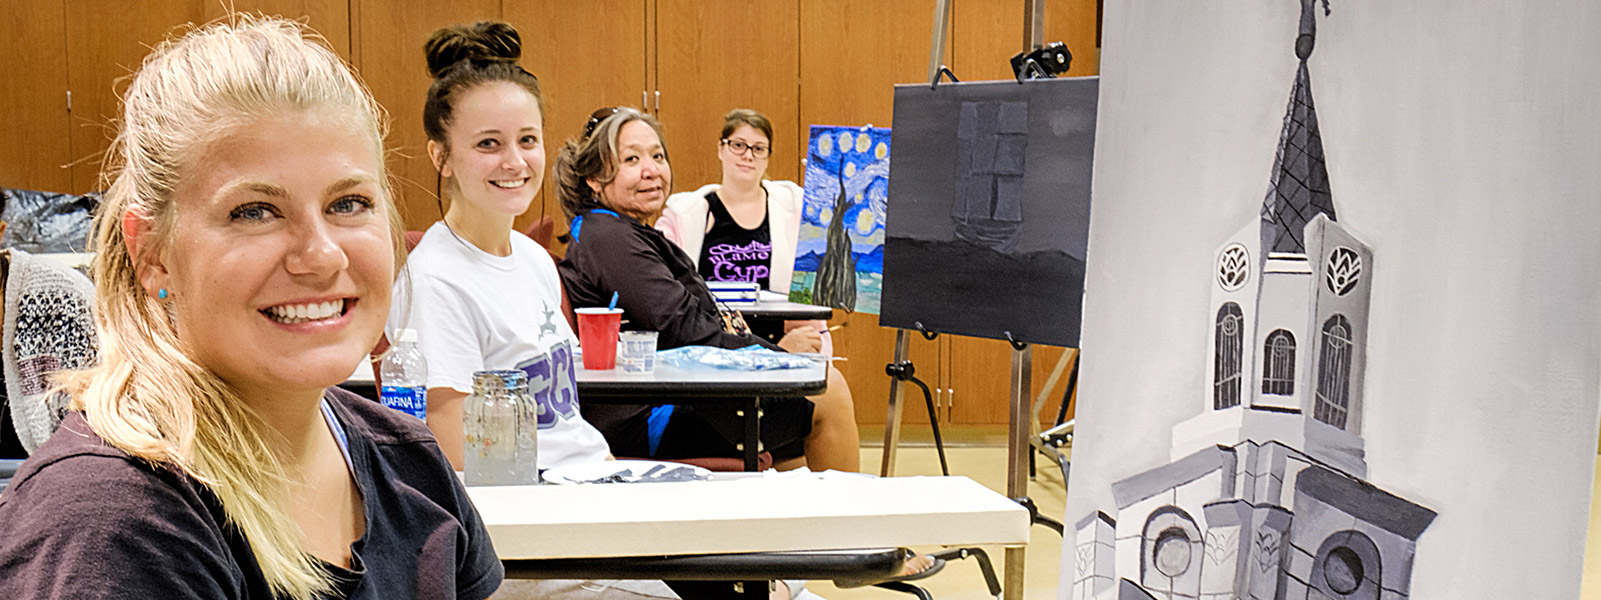 four female students in painting class